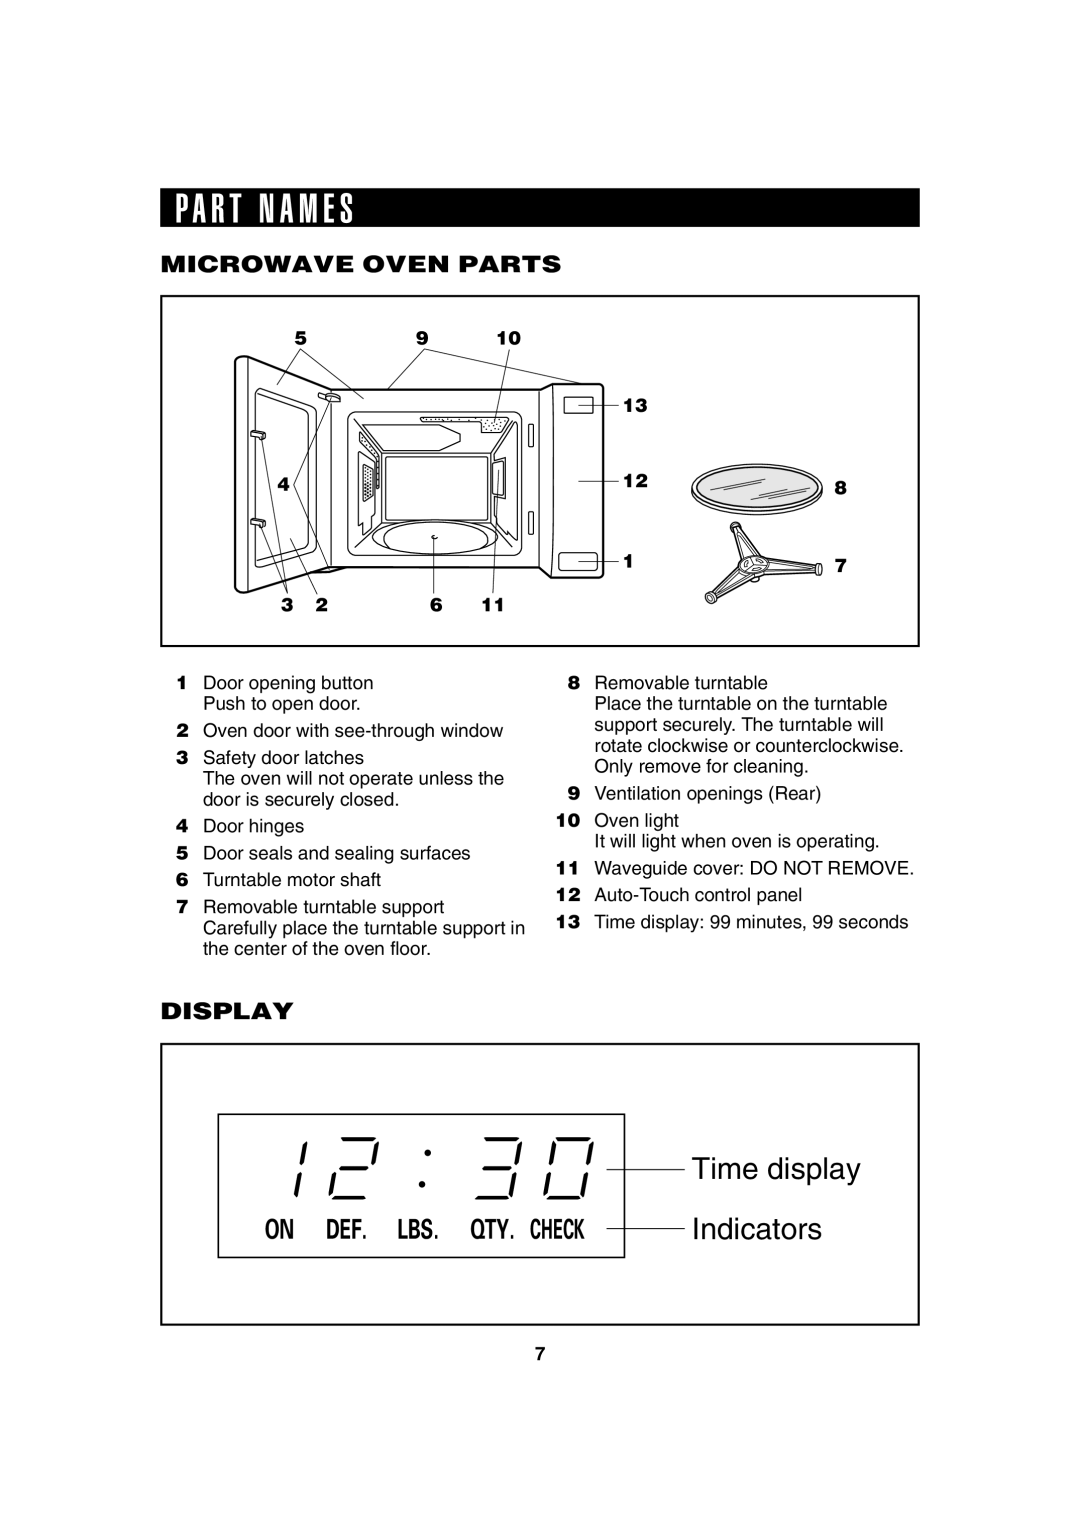 Sharp 209H, R-230H, 203H P A R T N A M E S, Time display Indicators, On Def. Lbs. Qty. Check, Microwave Oven Parts, Display 